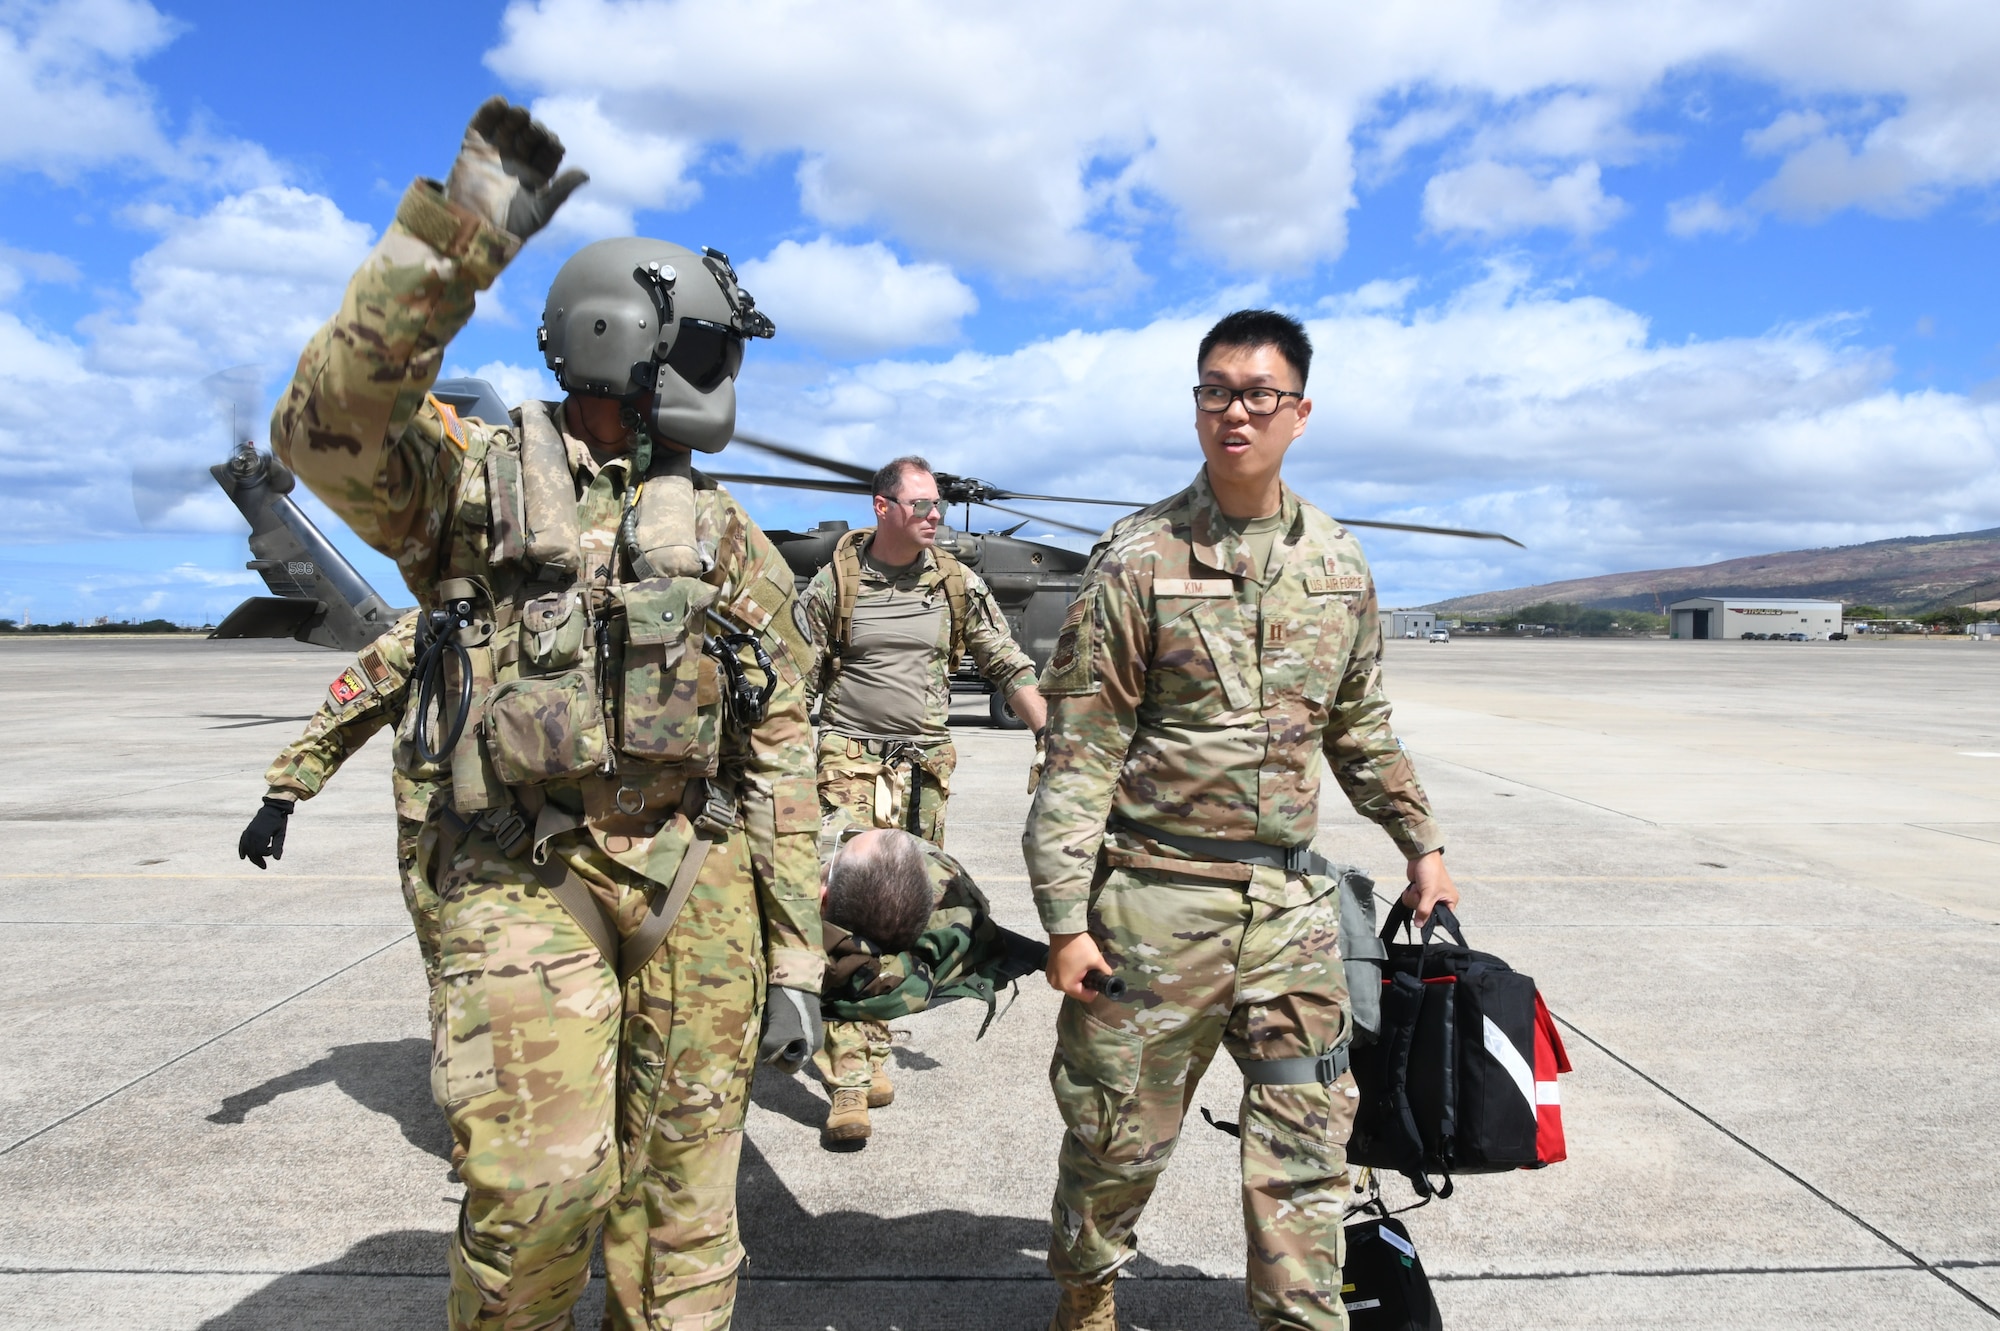 459th holds SPAM exercise: Members of the 459th Air Refueling Wing combined with Guard, Active-Duty units to train in South Pacific Air Force Multi-Mission Excercise. 